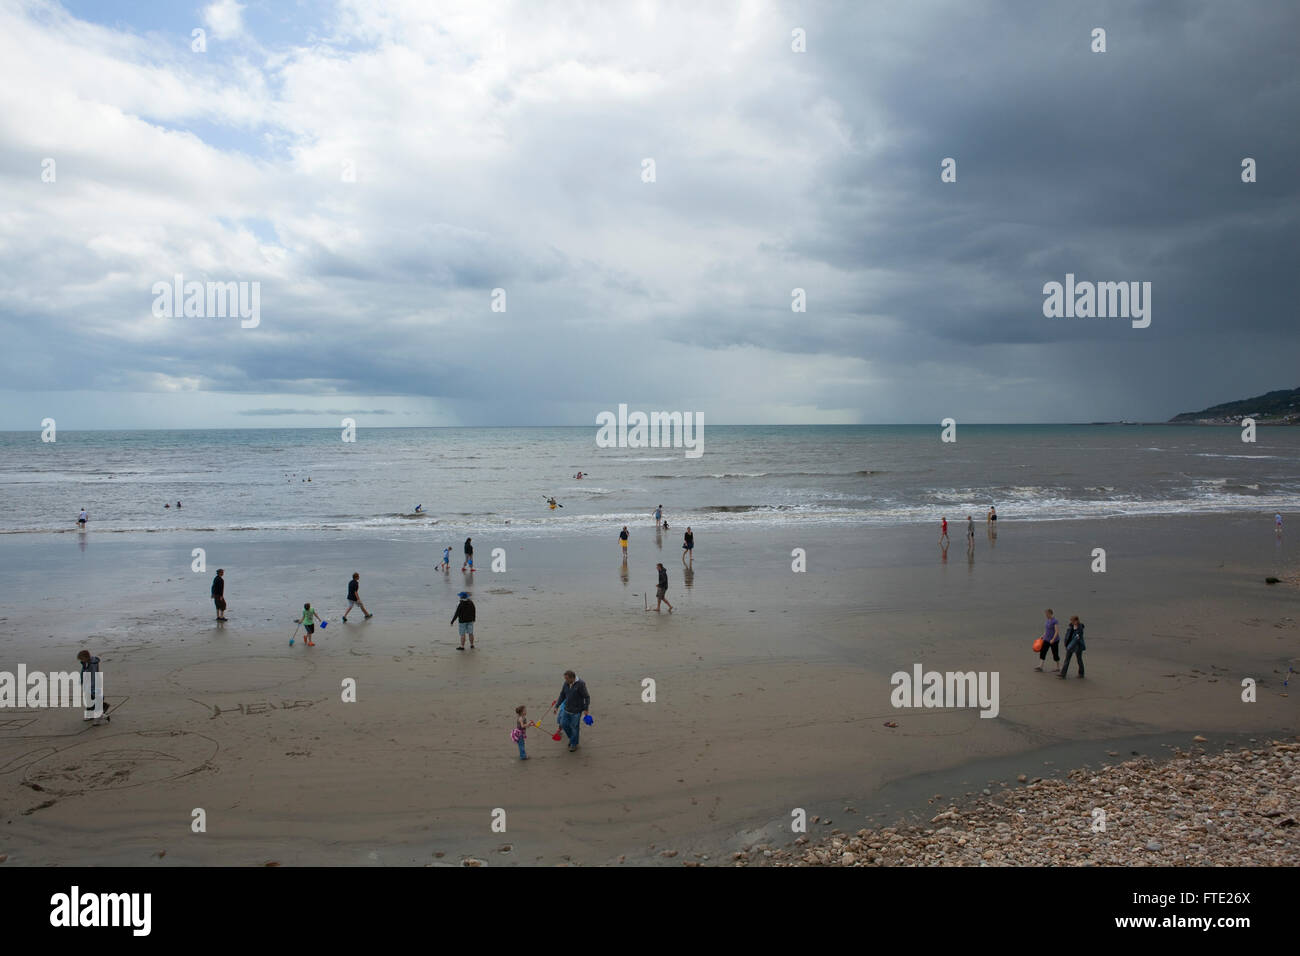 Holiday makers walking and playing on the sand of a british beach in a scene of typical british summer weather, damp cloudy and with a lack of sunshine. Stock Photo